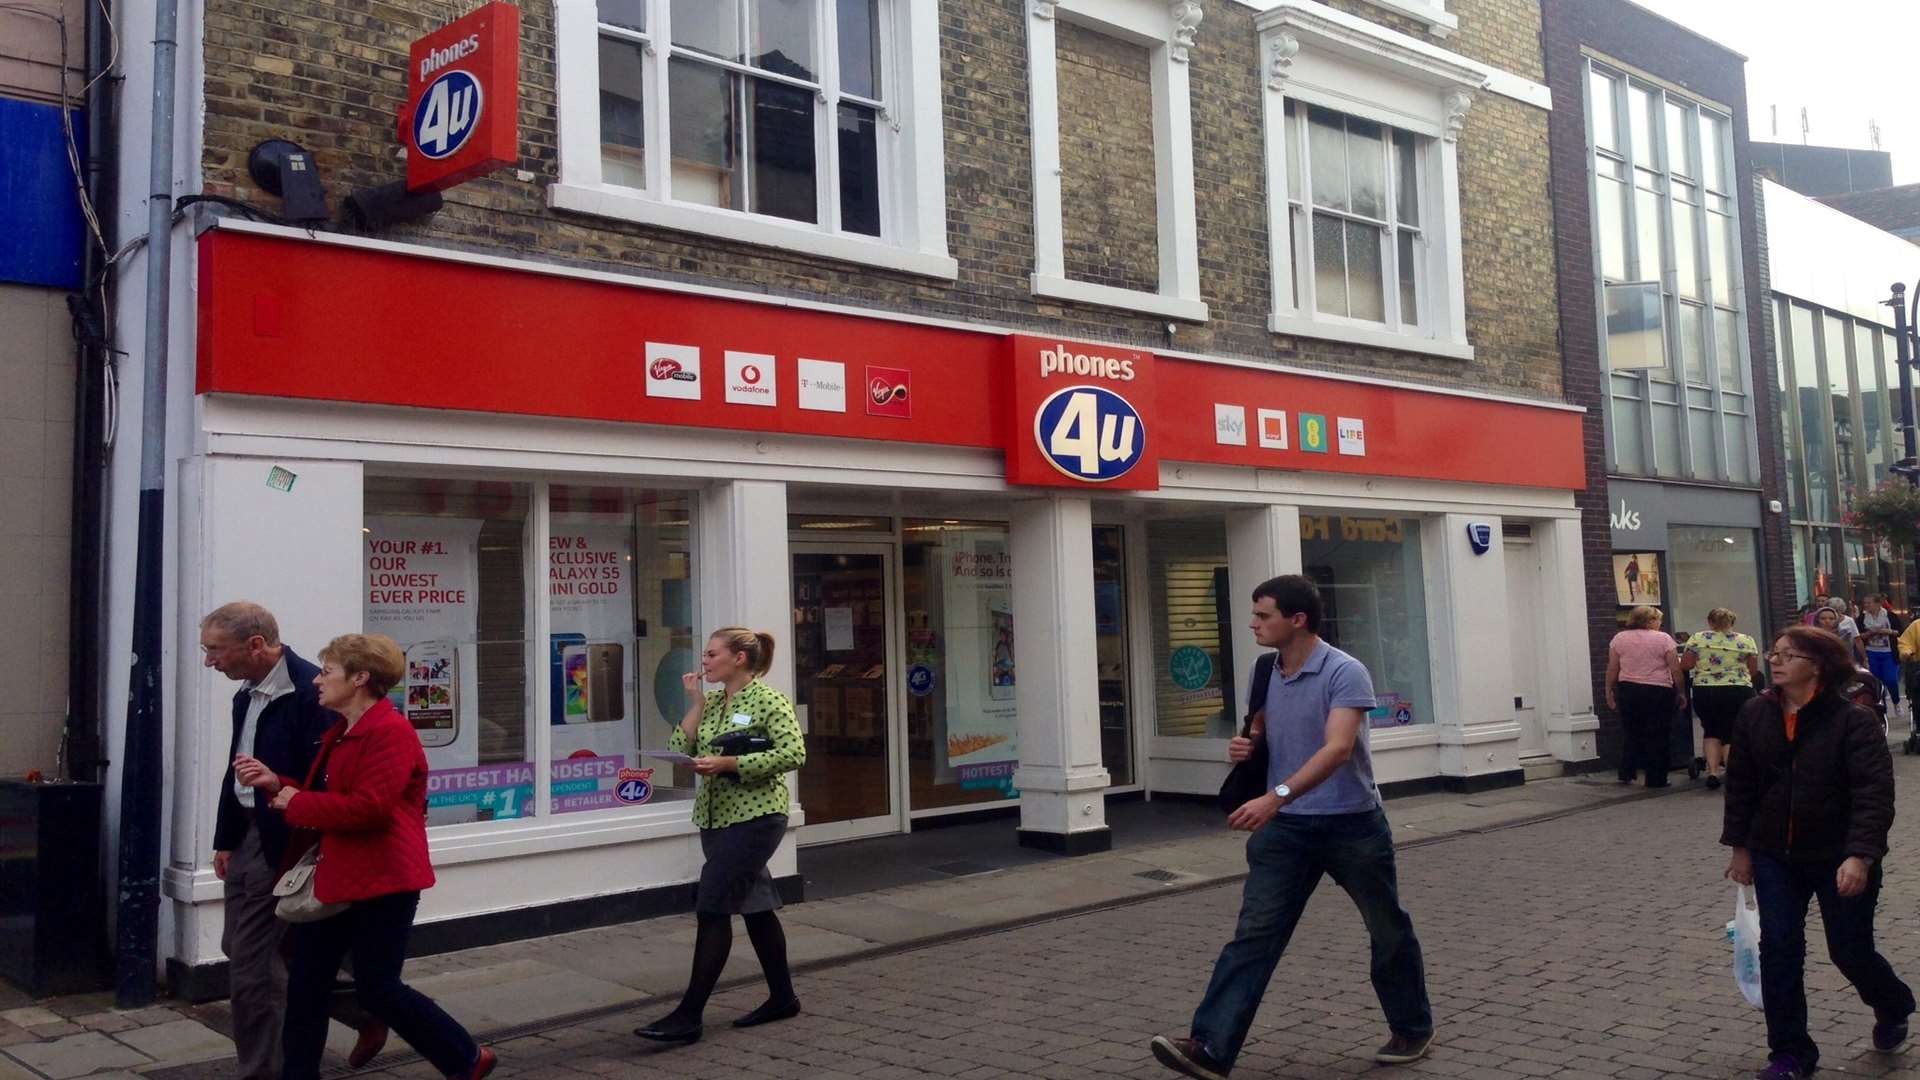 Phones 4U in Week Street, Maidstone. The company went into administration in 2014